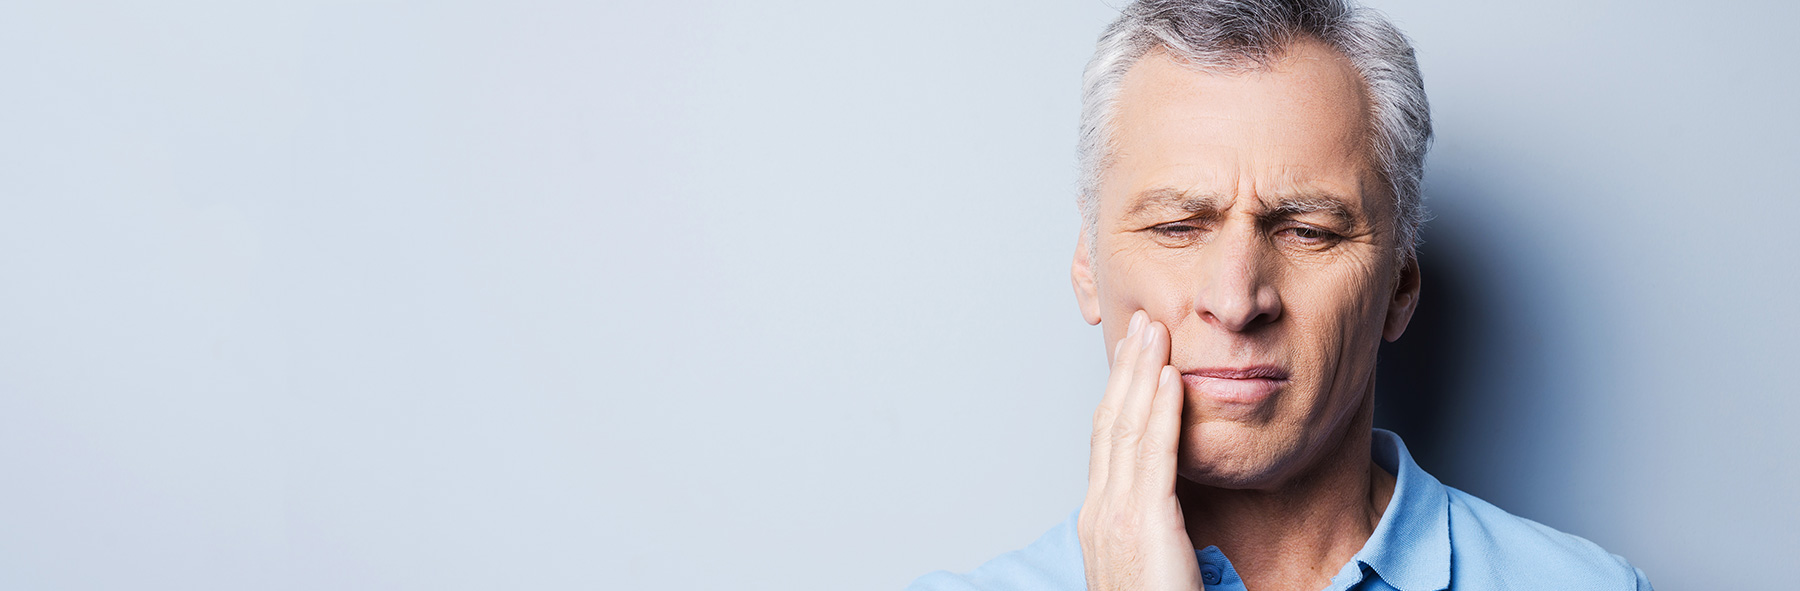 Toothache frequently asked questions